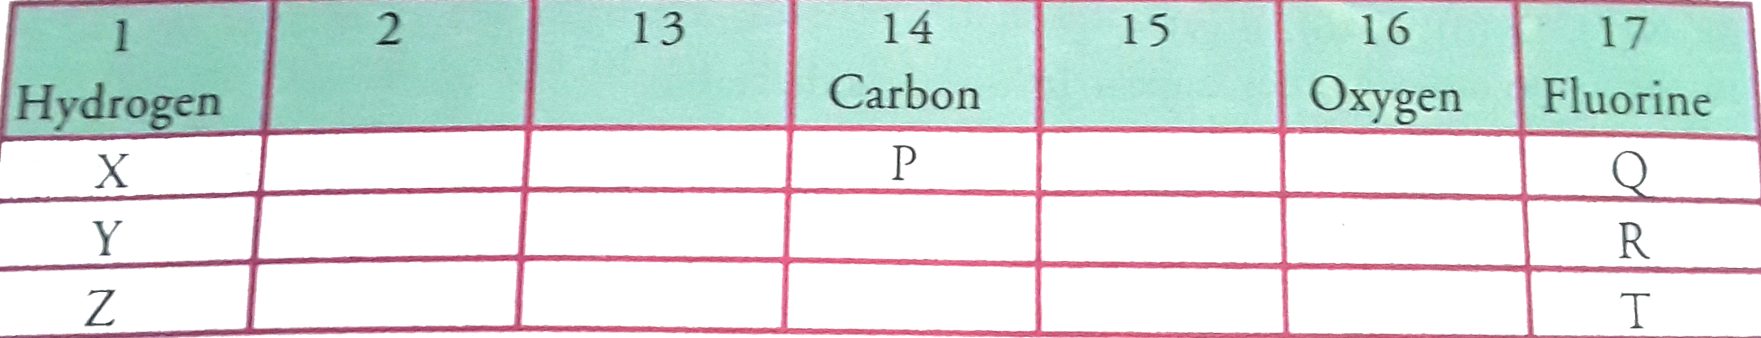 From the part of a periodic table, answer the following questions      (a) Atomic number of oxygen is 8. What would be the atomic number of, Fluorine ?   (b) Out of 'X' and 'Q' which element has larger atomic size ? Give reason for your answer.   (c) Out of 'Y' and 'Z' which element has smaller atomic size ? Give reason for your answer.